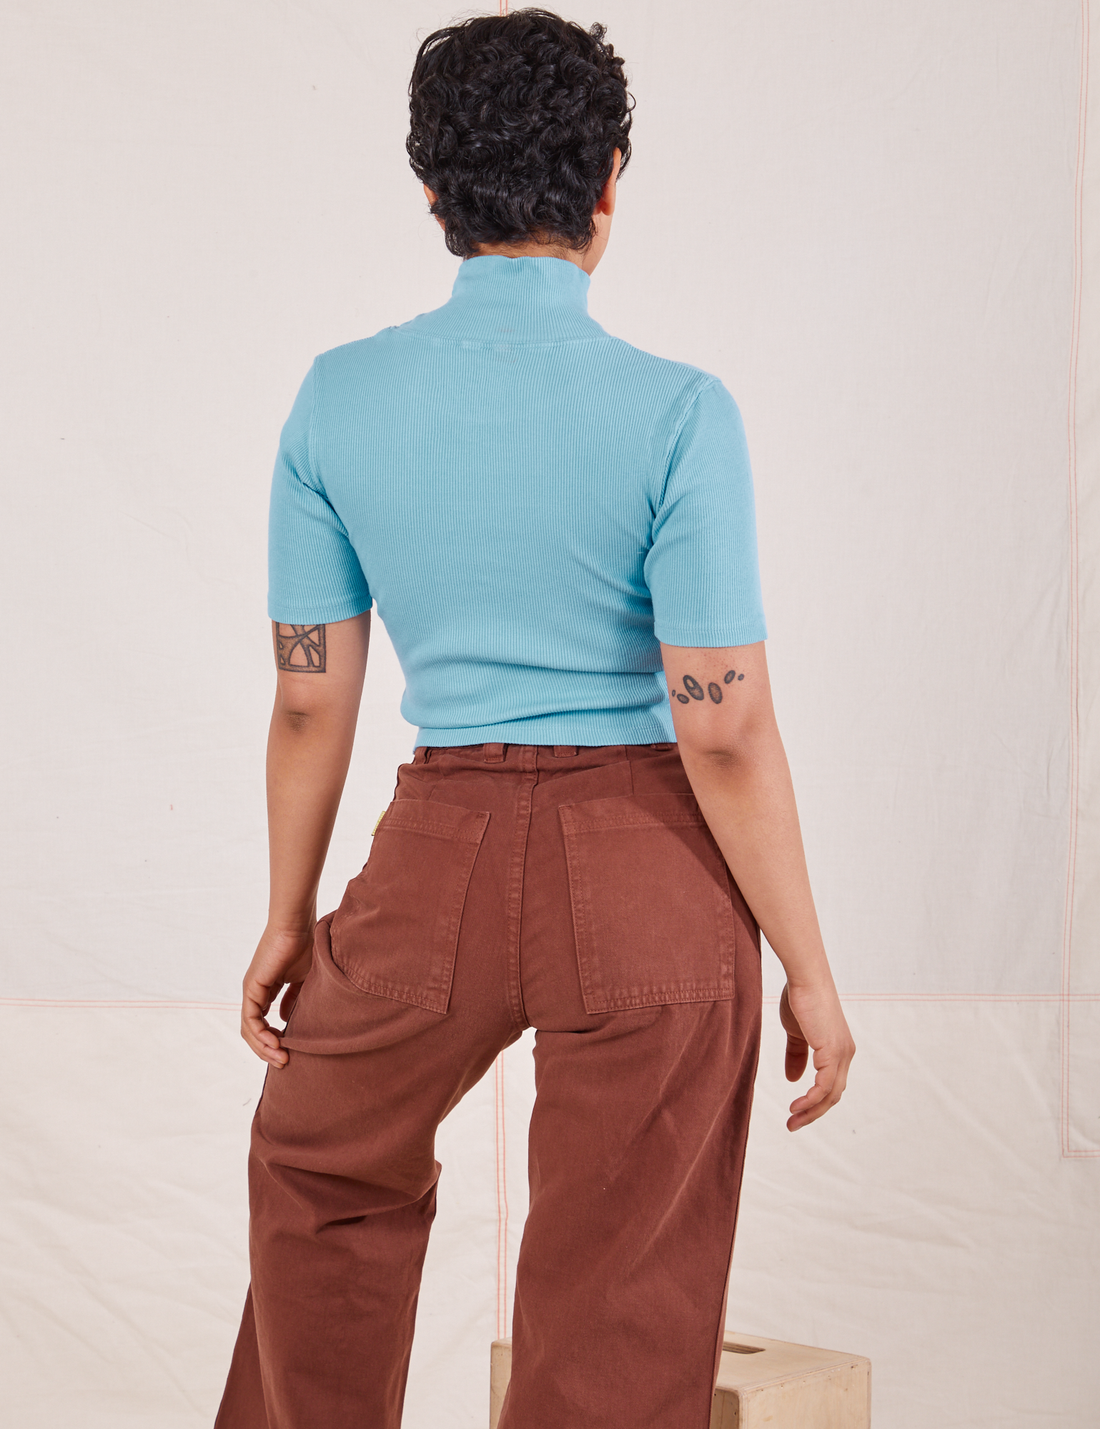 1/2 Sleeve Essential Turtleneck in Baby Blue back view on Mika wearing fudgesicle brown Bell Bottoms